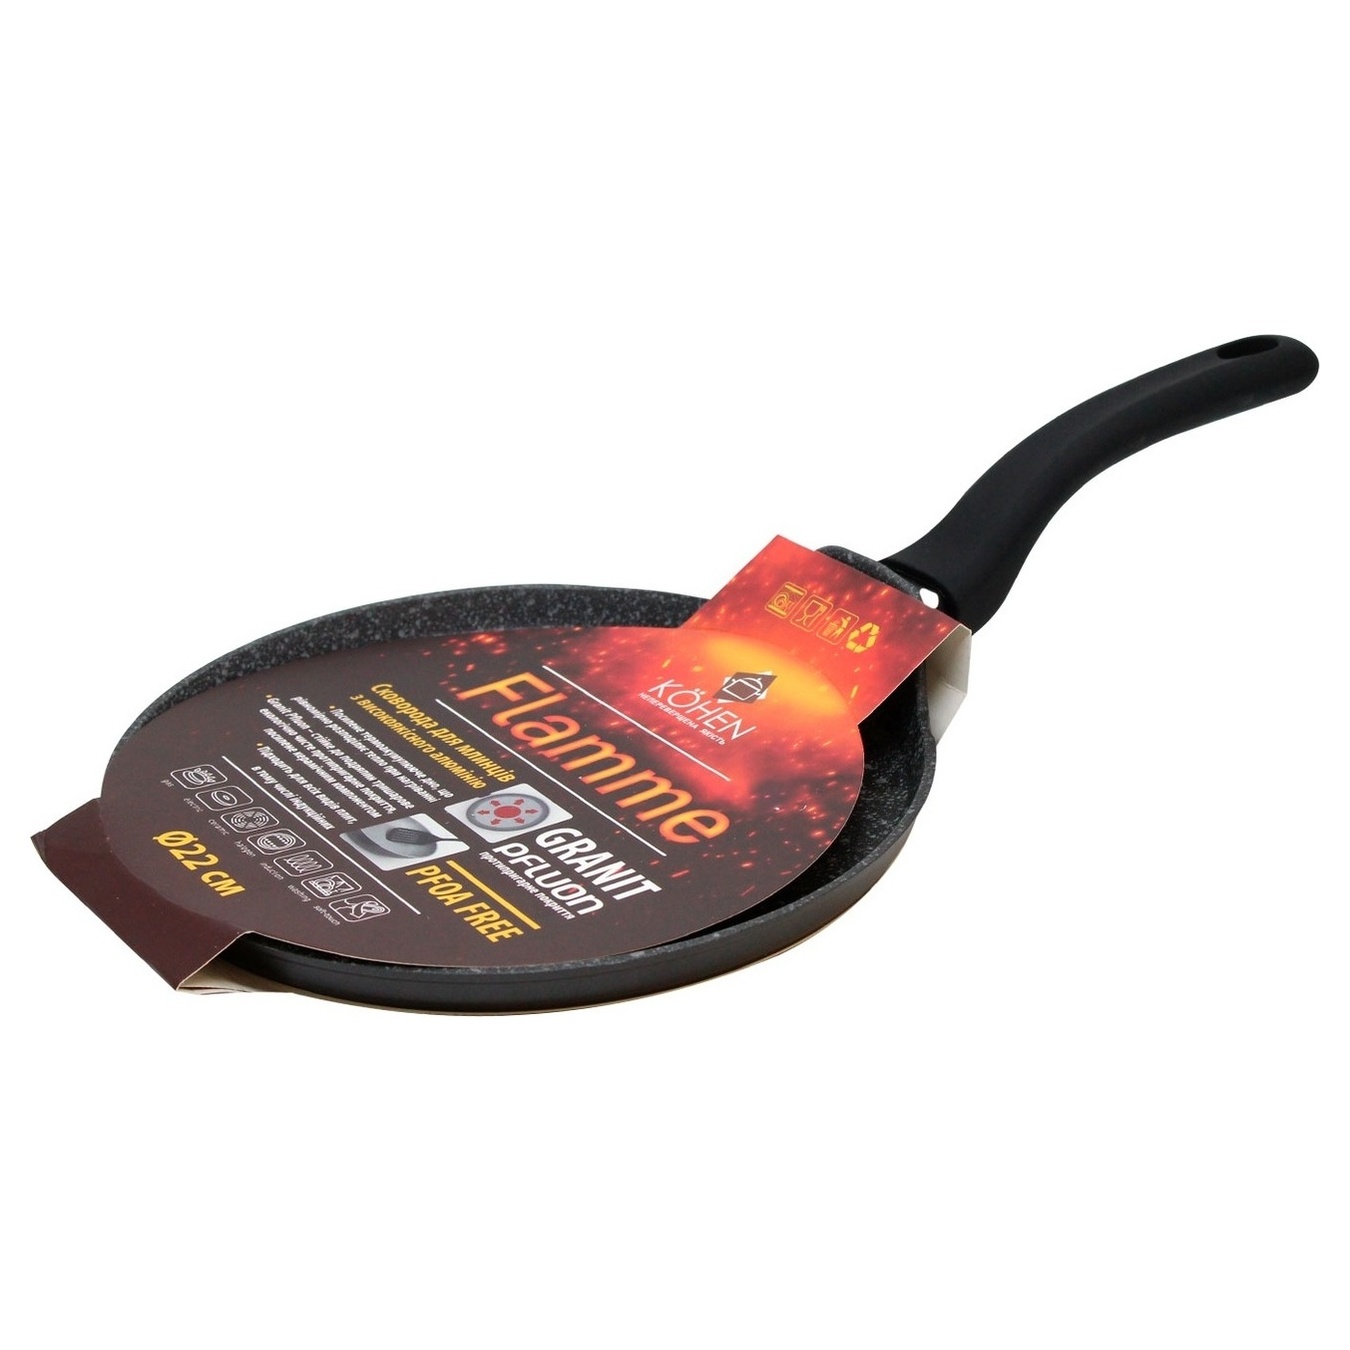 Frying pan Kohen Flamme crepe for pancakes non-stick coating induction 22 cm